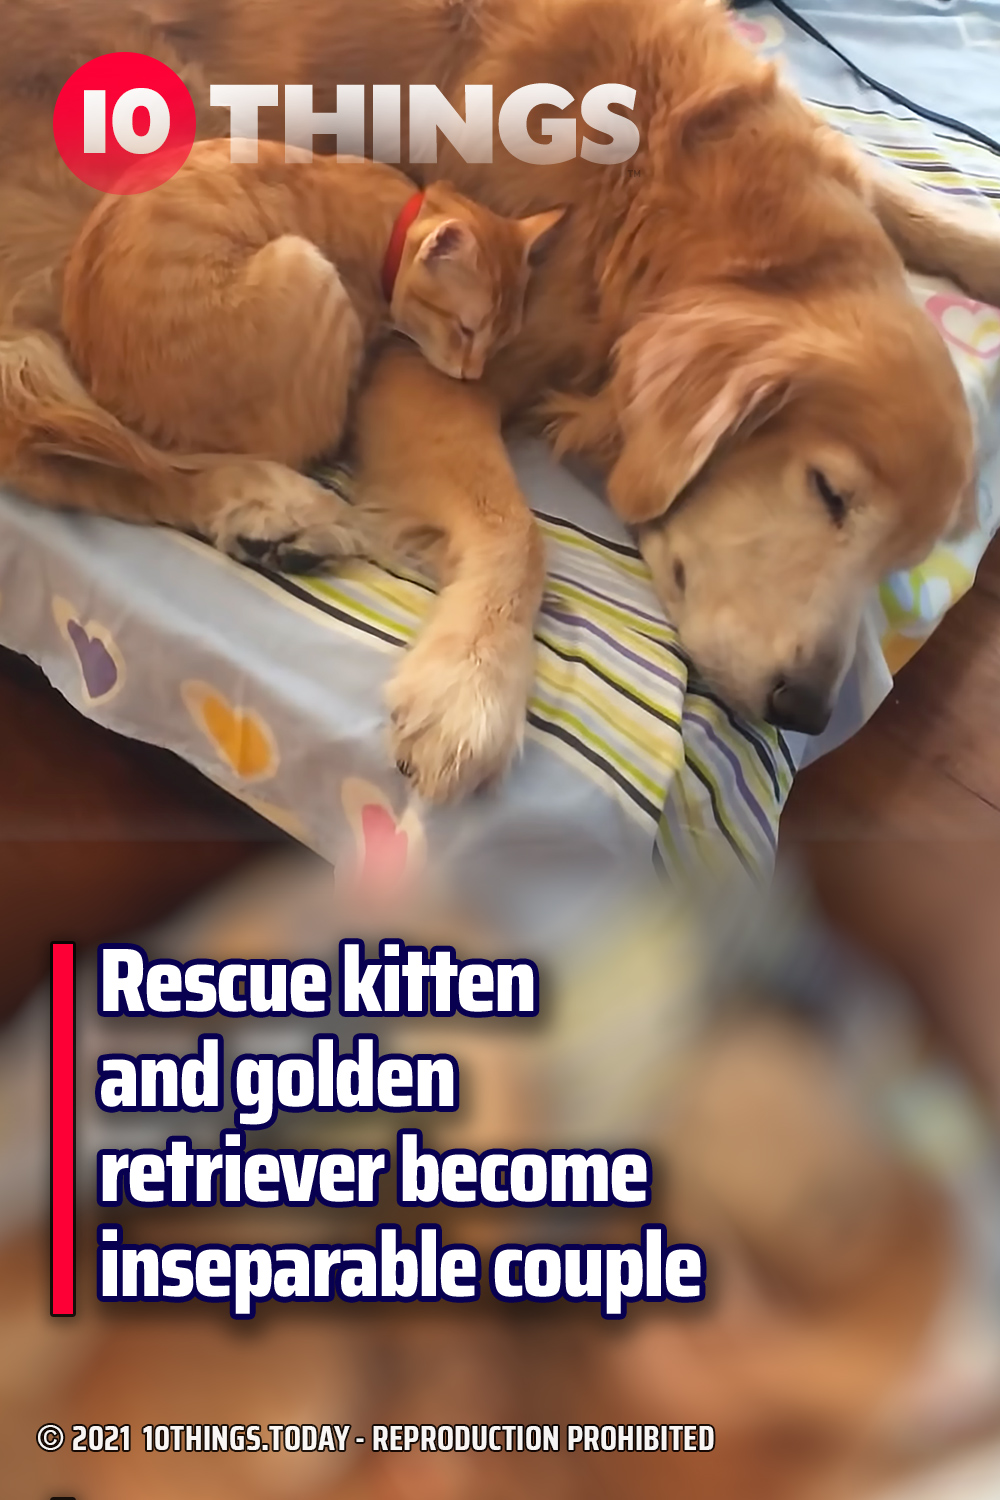 Rescue kitten and golden retriever become inseparable couple